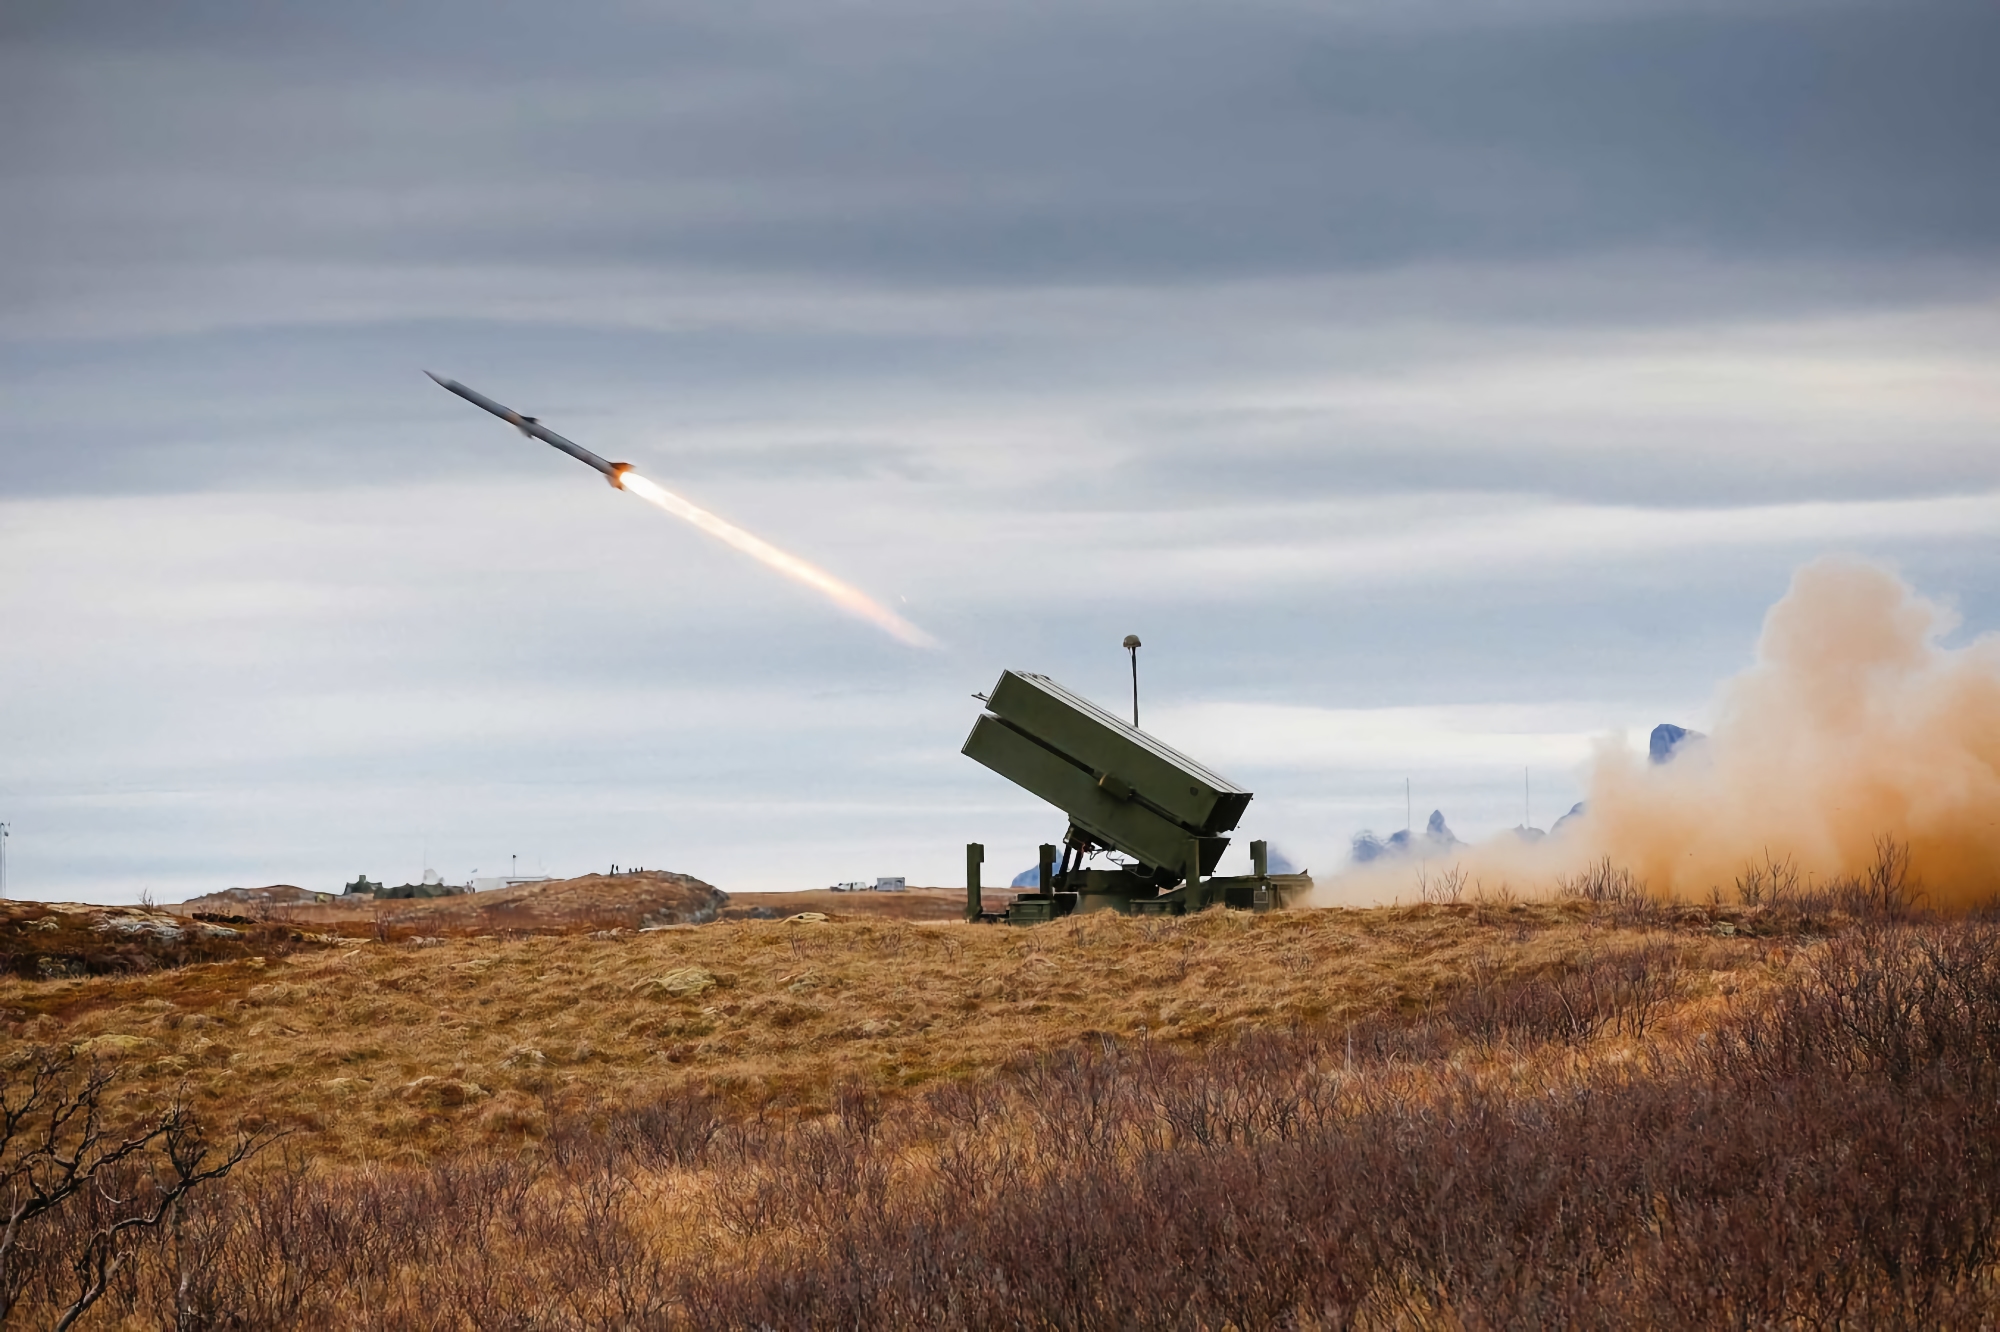 The U.S. is preparing a new $1,000,000,000 military aid package for Ukraine: it will include ammunition for HIMARS and NASAMS, as well as 50 M113 armored personnel carriers